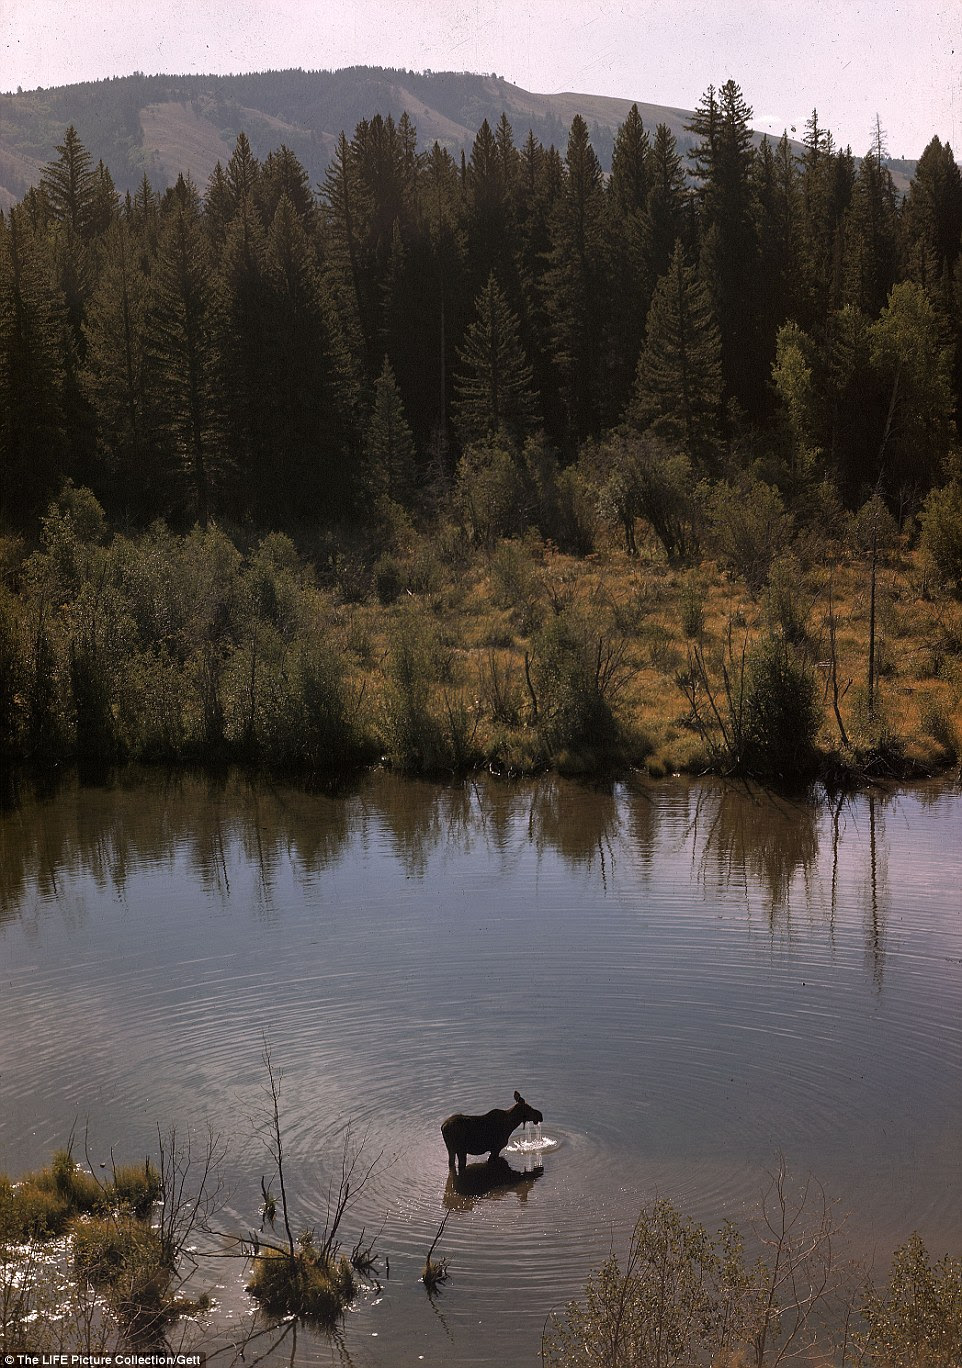 Tranquil surroundings: A moose  drinking in the stream with rolling hills and wooded areas in the background